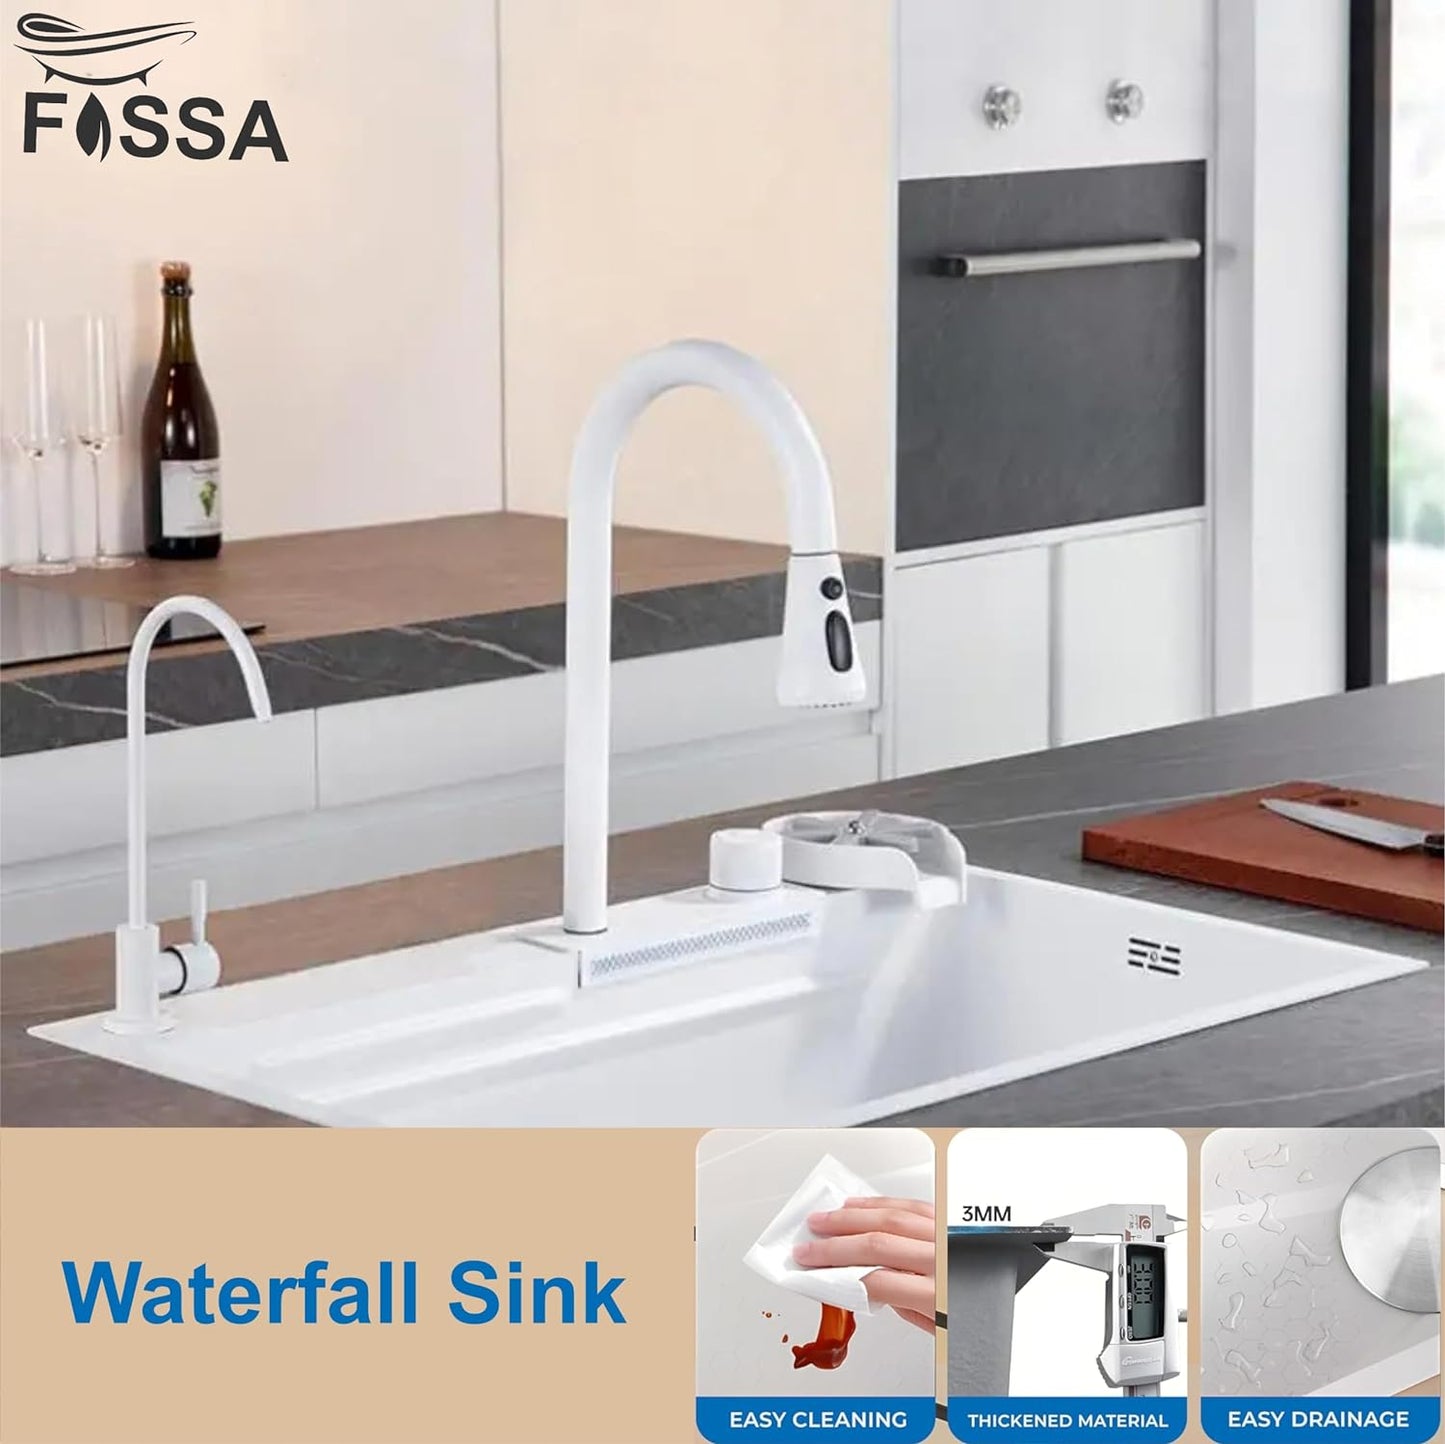 Fossa 30"x18" Waterfall Kitchen Sink with Integrated Waterfall Mode and Pull down Faucet with Steel Tray, Fruit Basket, and Complete Accessories Set - (White)